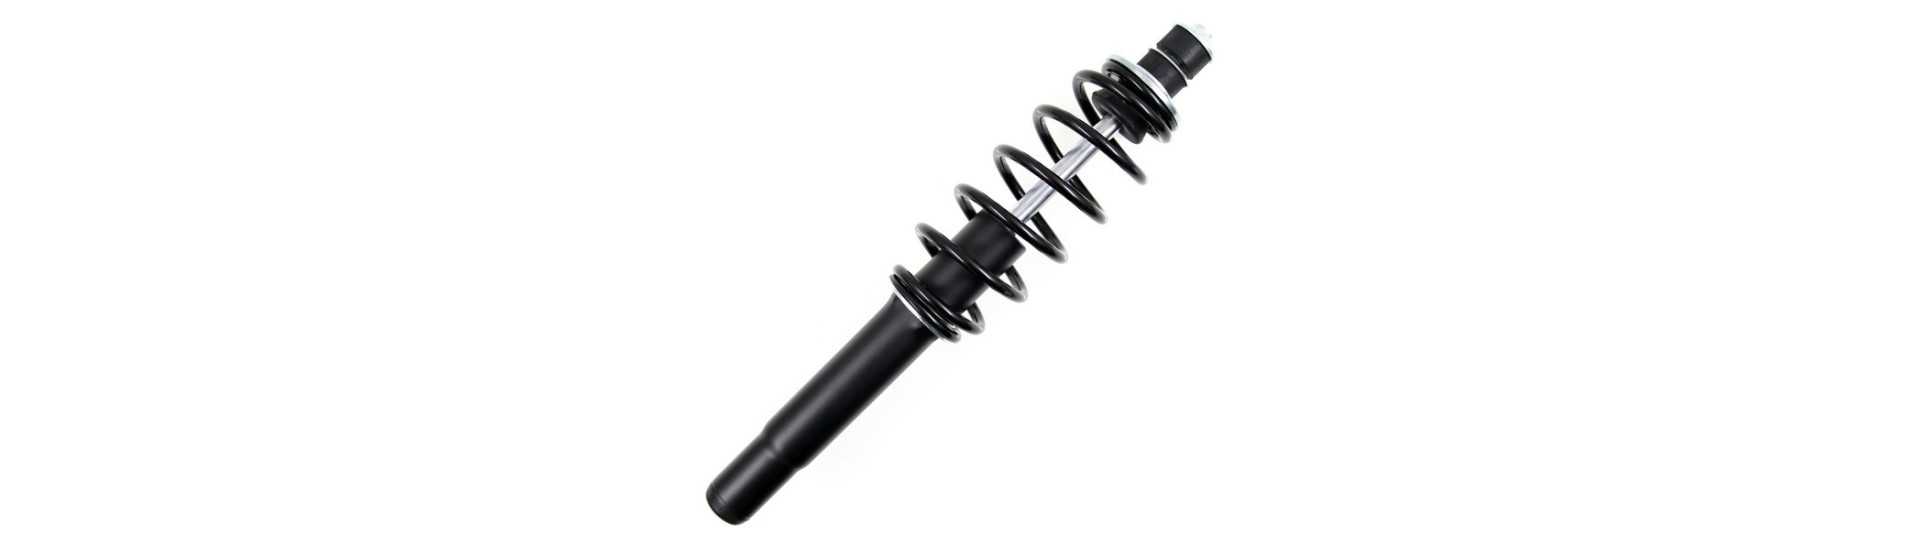 Best price shock absorber for car without license